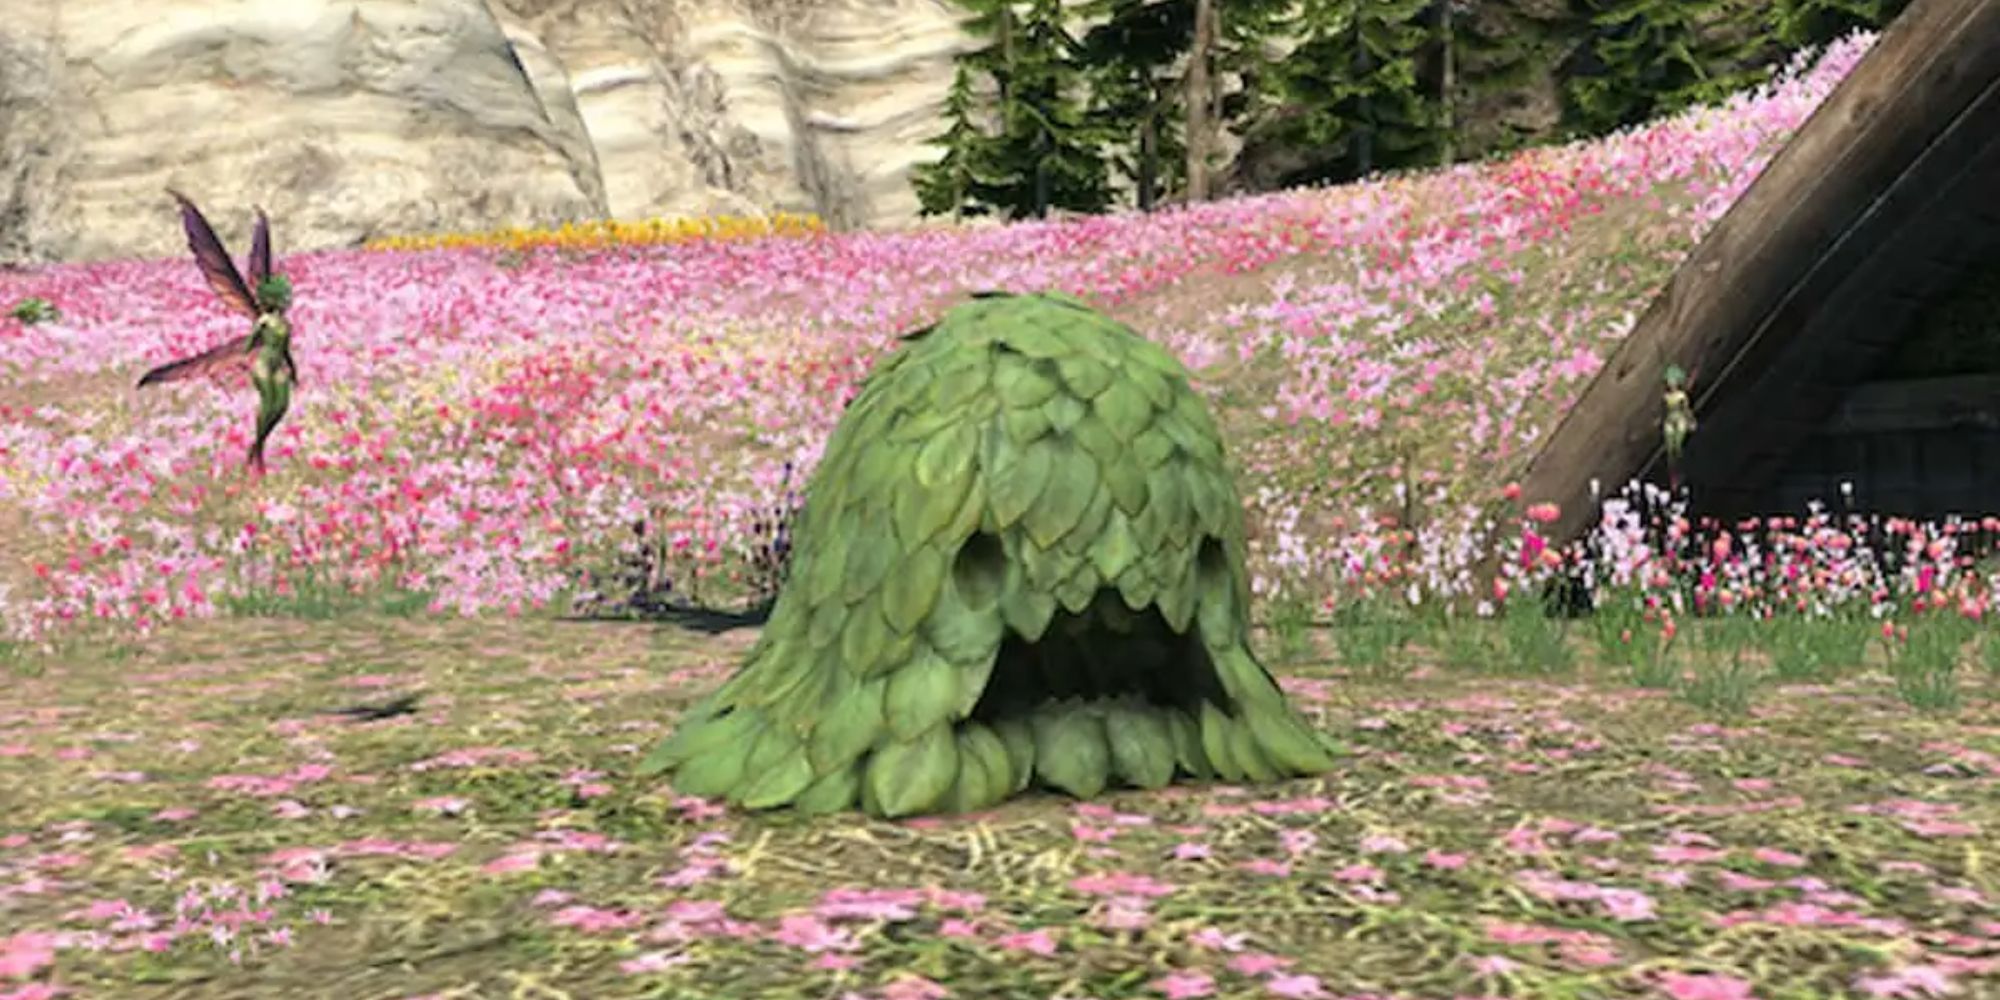 Anden from Final Fantasy 14, a Bushman that looks like a pile of leaves with a face.